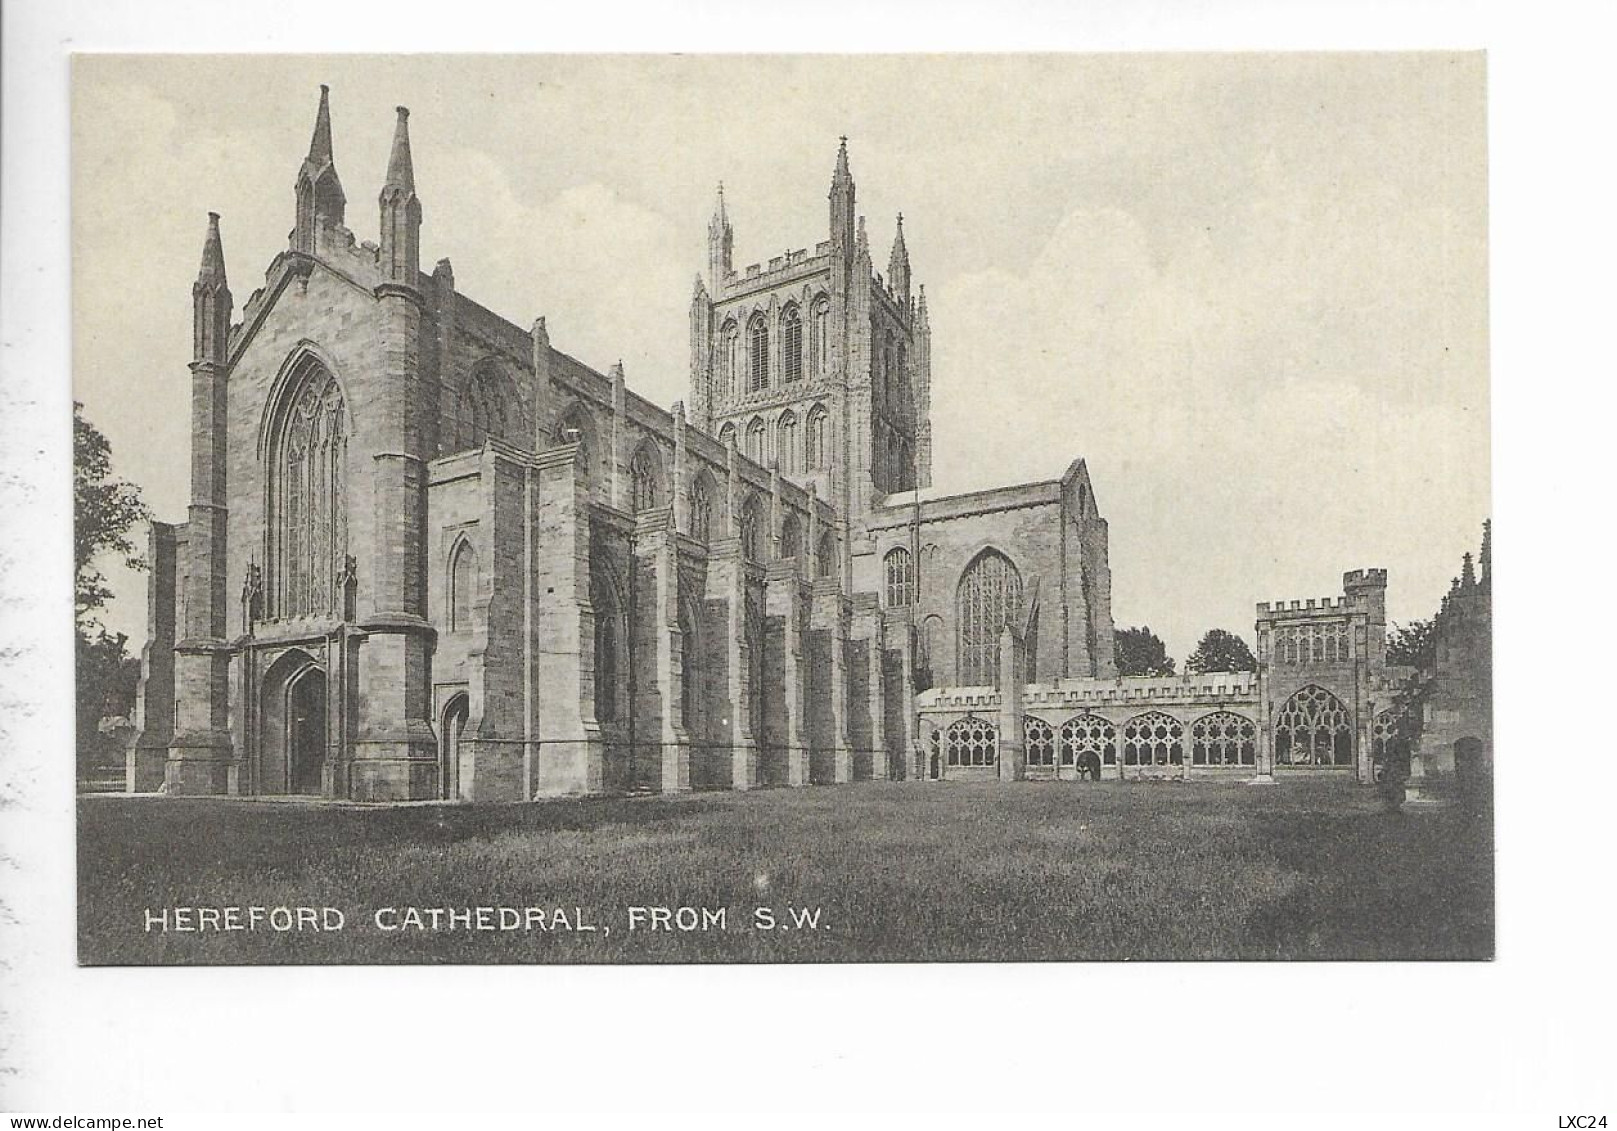 HEREFORD CATHEDRAL FROM S.W. - Herefordshire